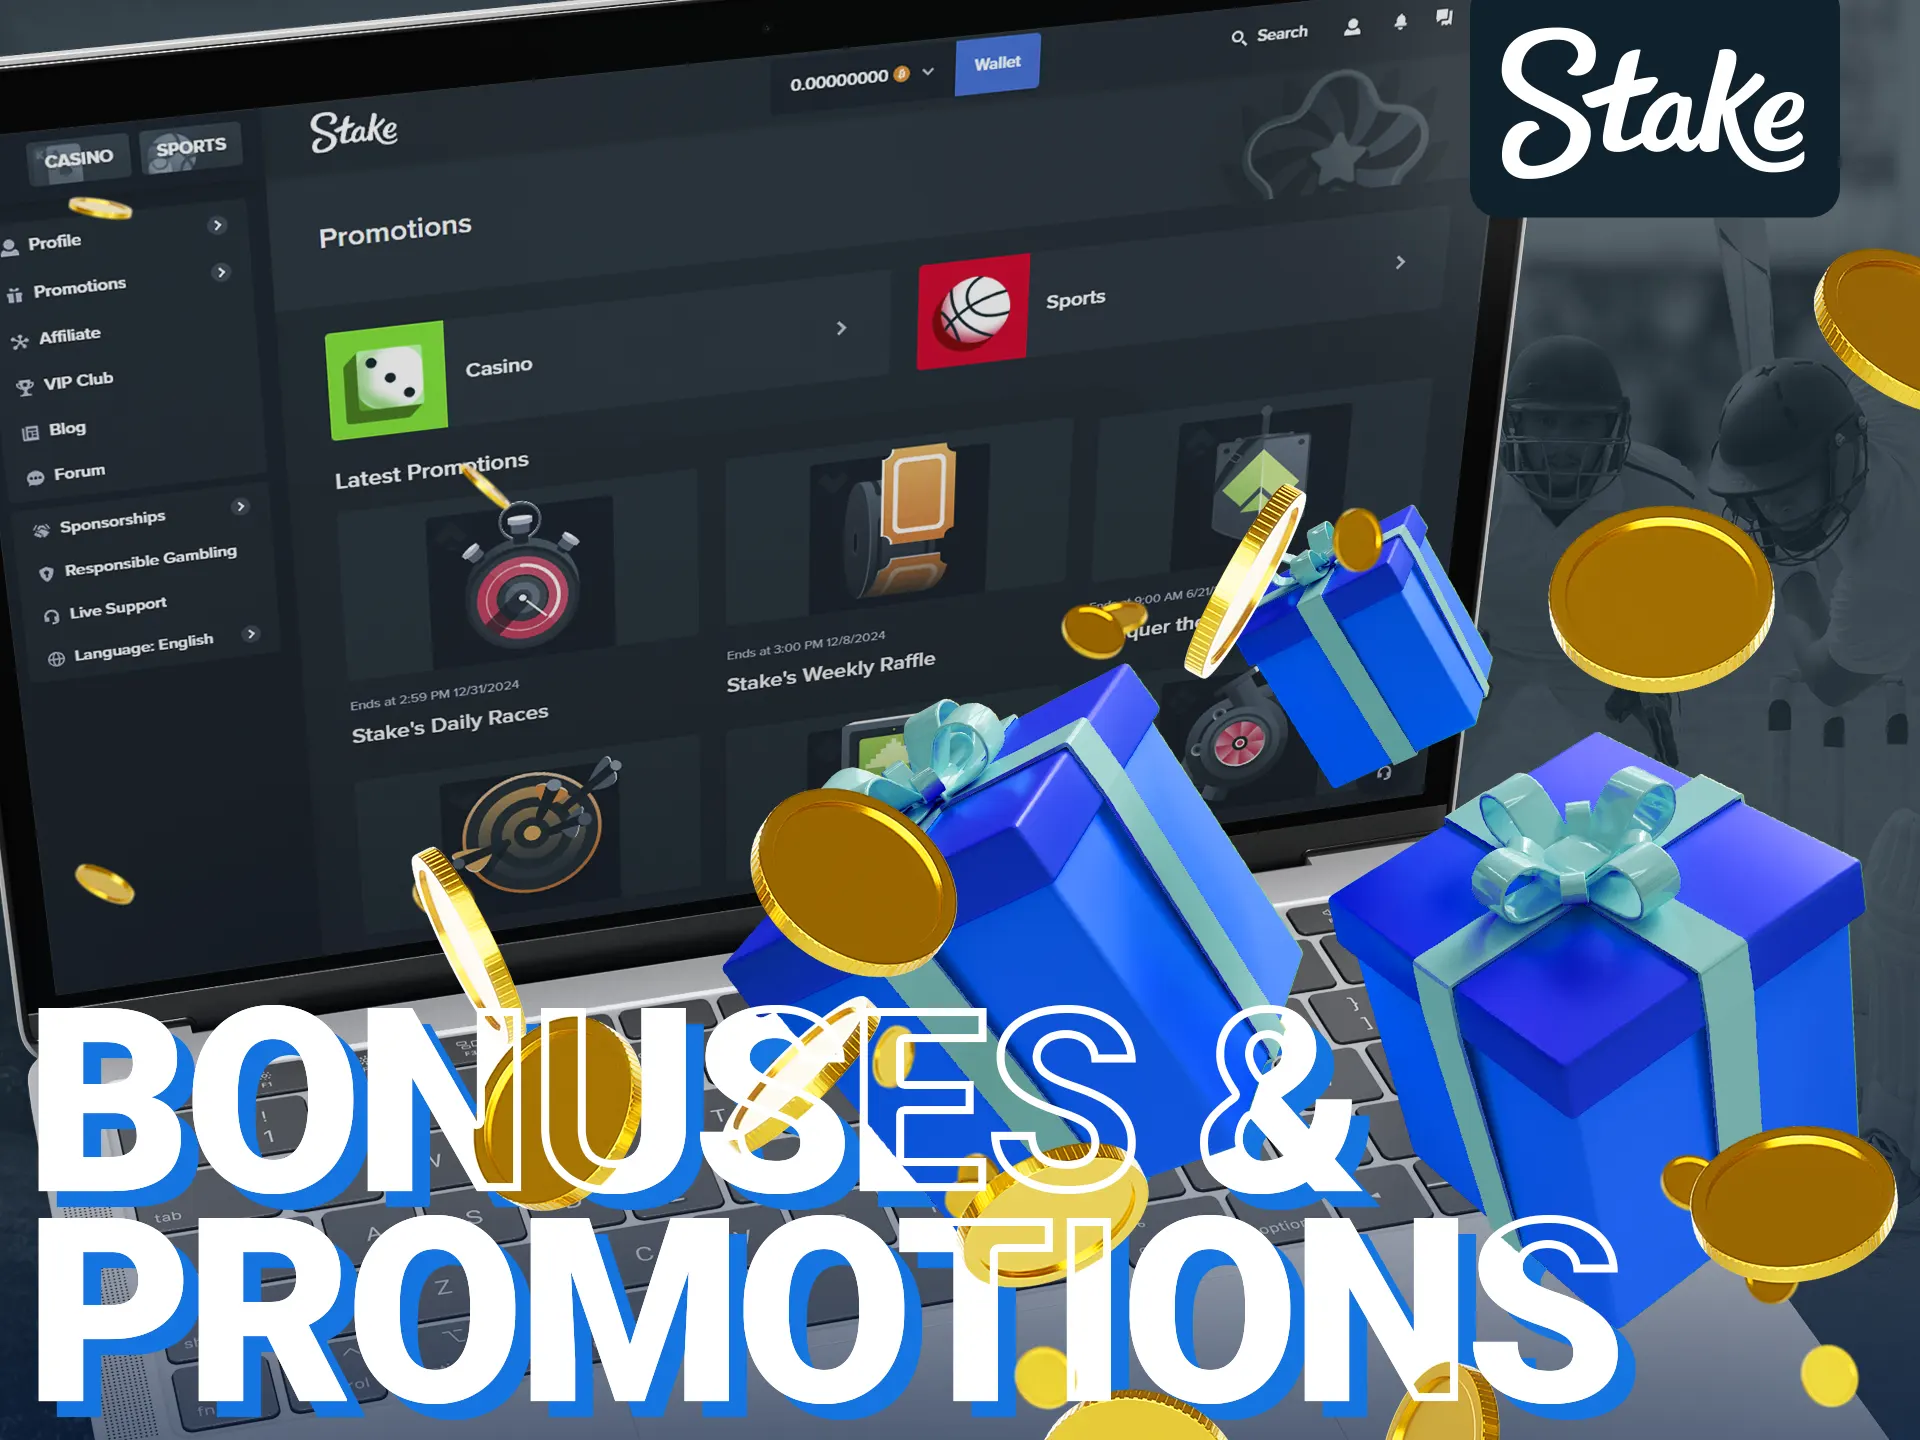 Stake offers exciting casino bonuses and promotions.